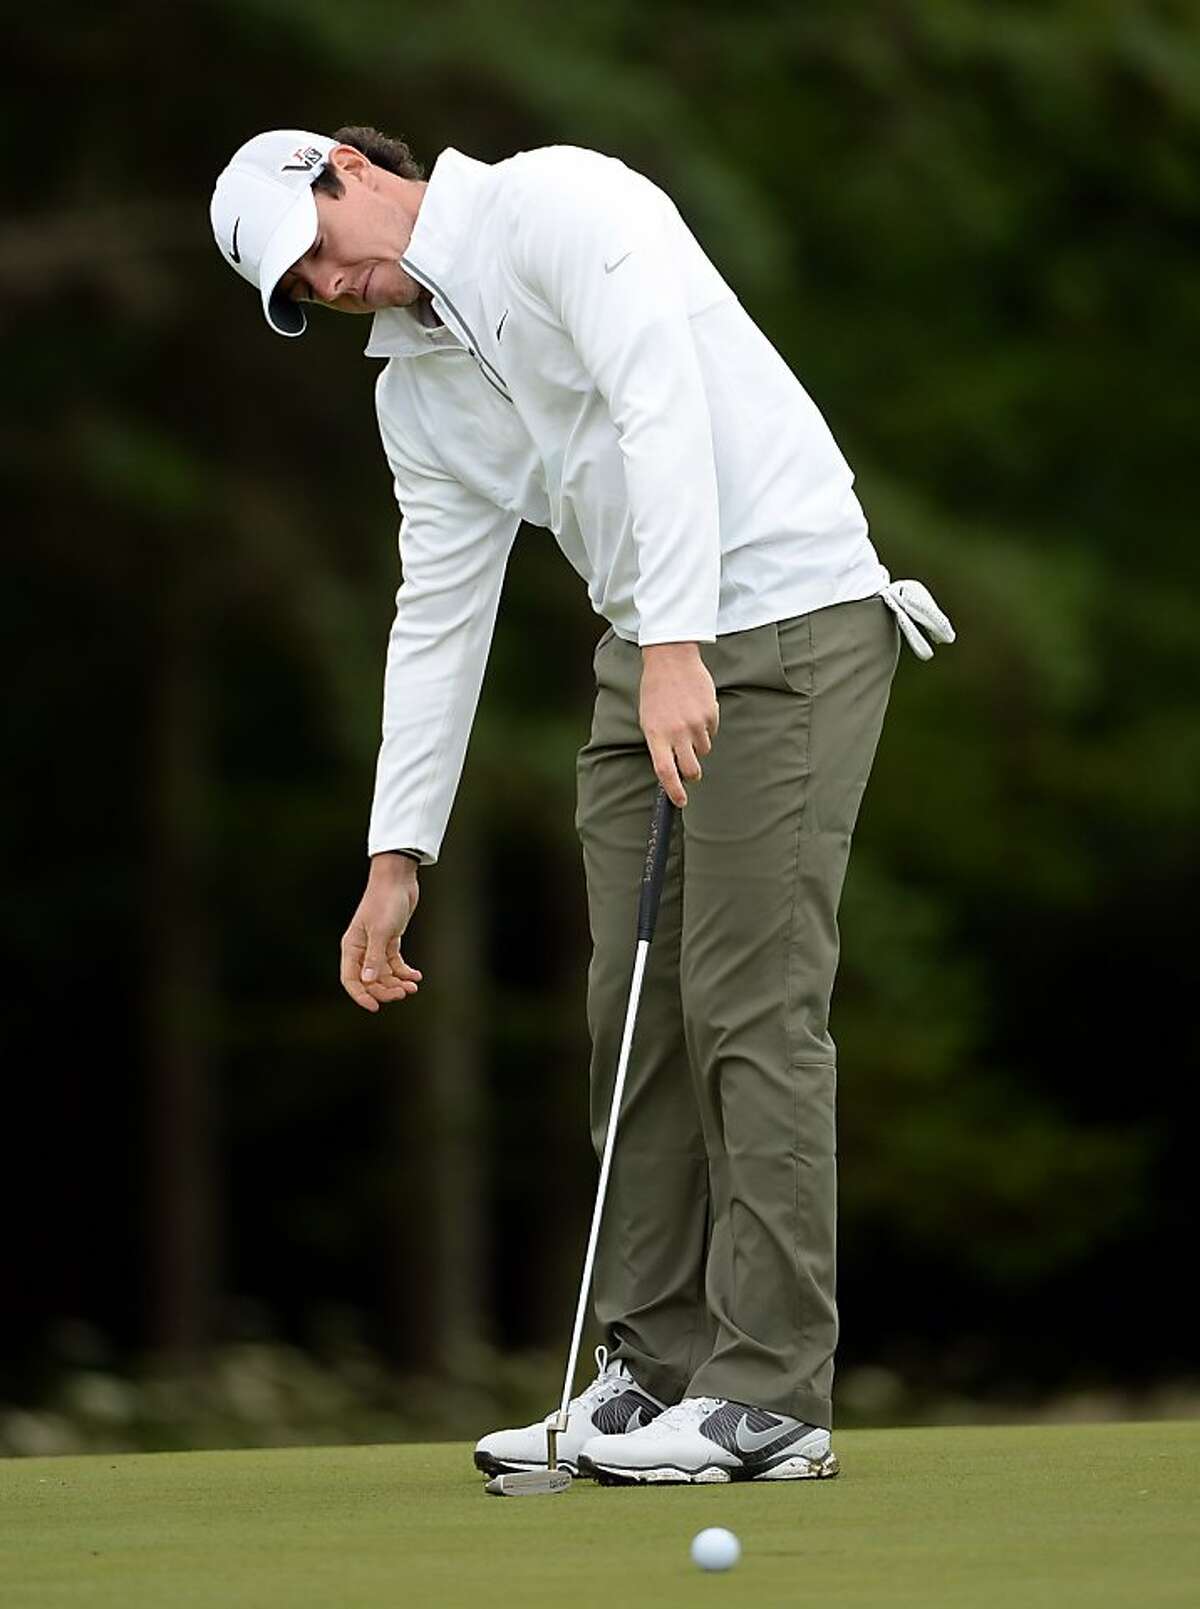 MAYNOOTH, IRELAND - JUNE 28: Rory McIlroy of Northern Ireland after a missed putt on the 14th hole during the second round of the Irish Open at Carton House Golf Club on June 28, 2013 in Maynooth, Ireland. (Photo by Ross Kinnaird/Getty Images)